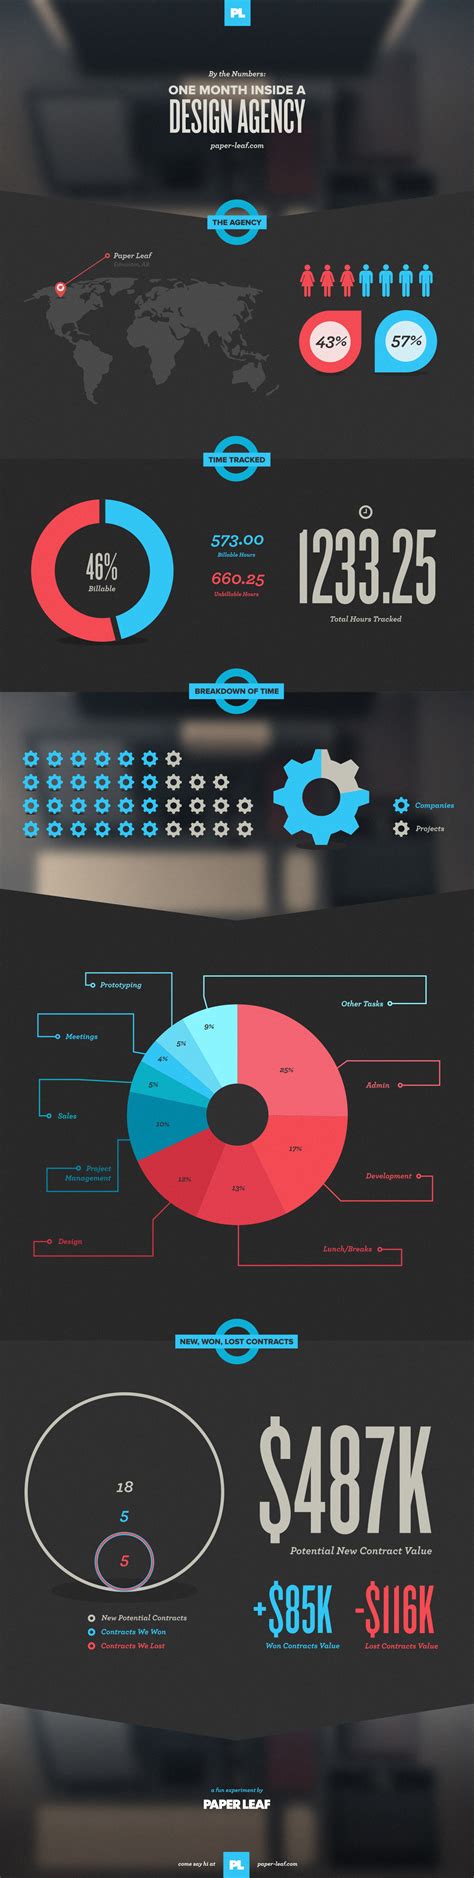 7 Great Infographics By Graphic Design Agencies Creative Bloq